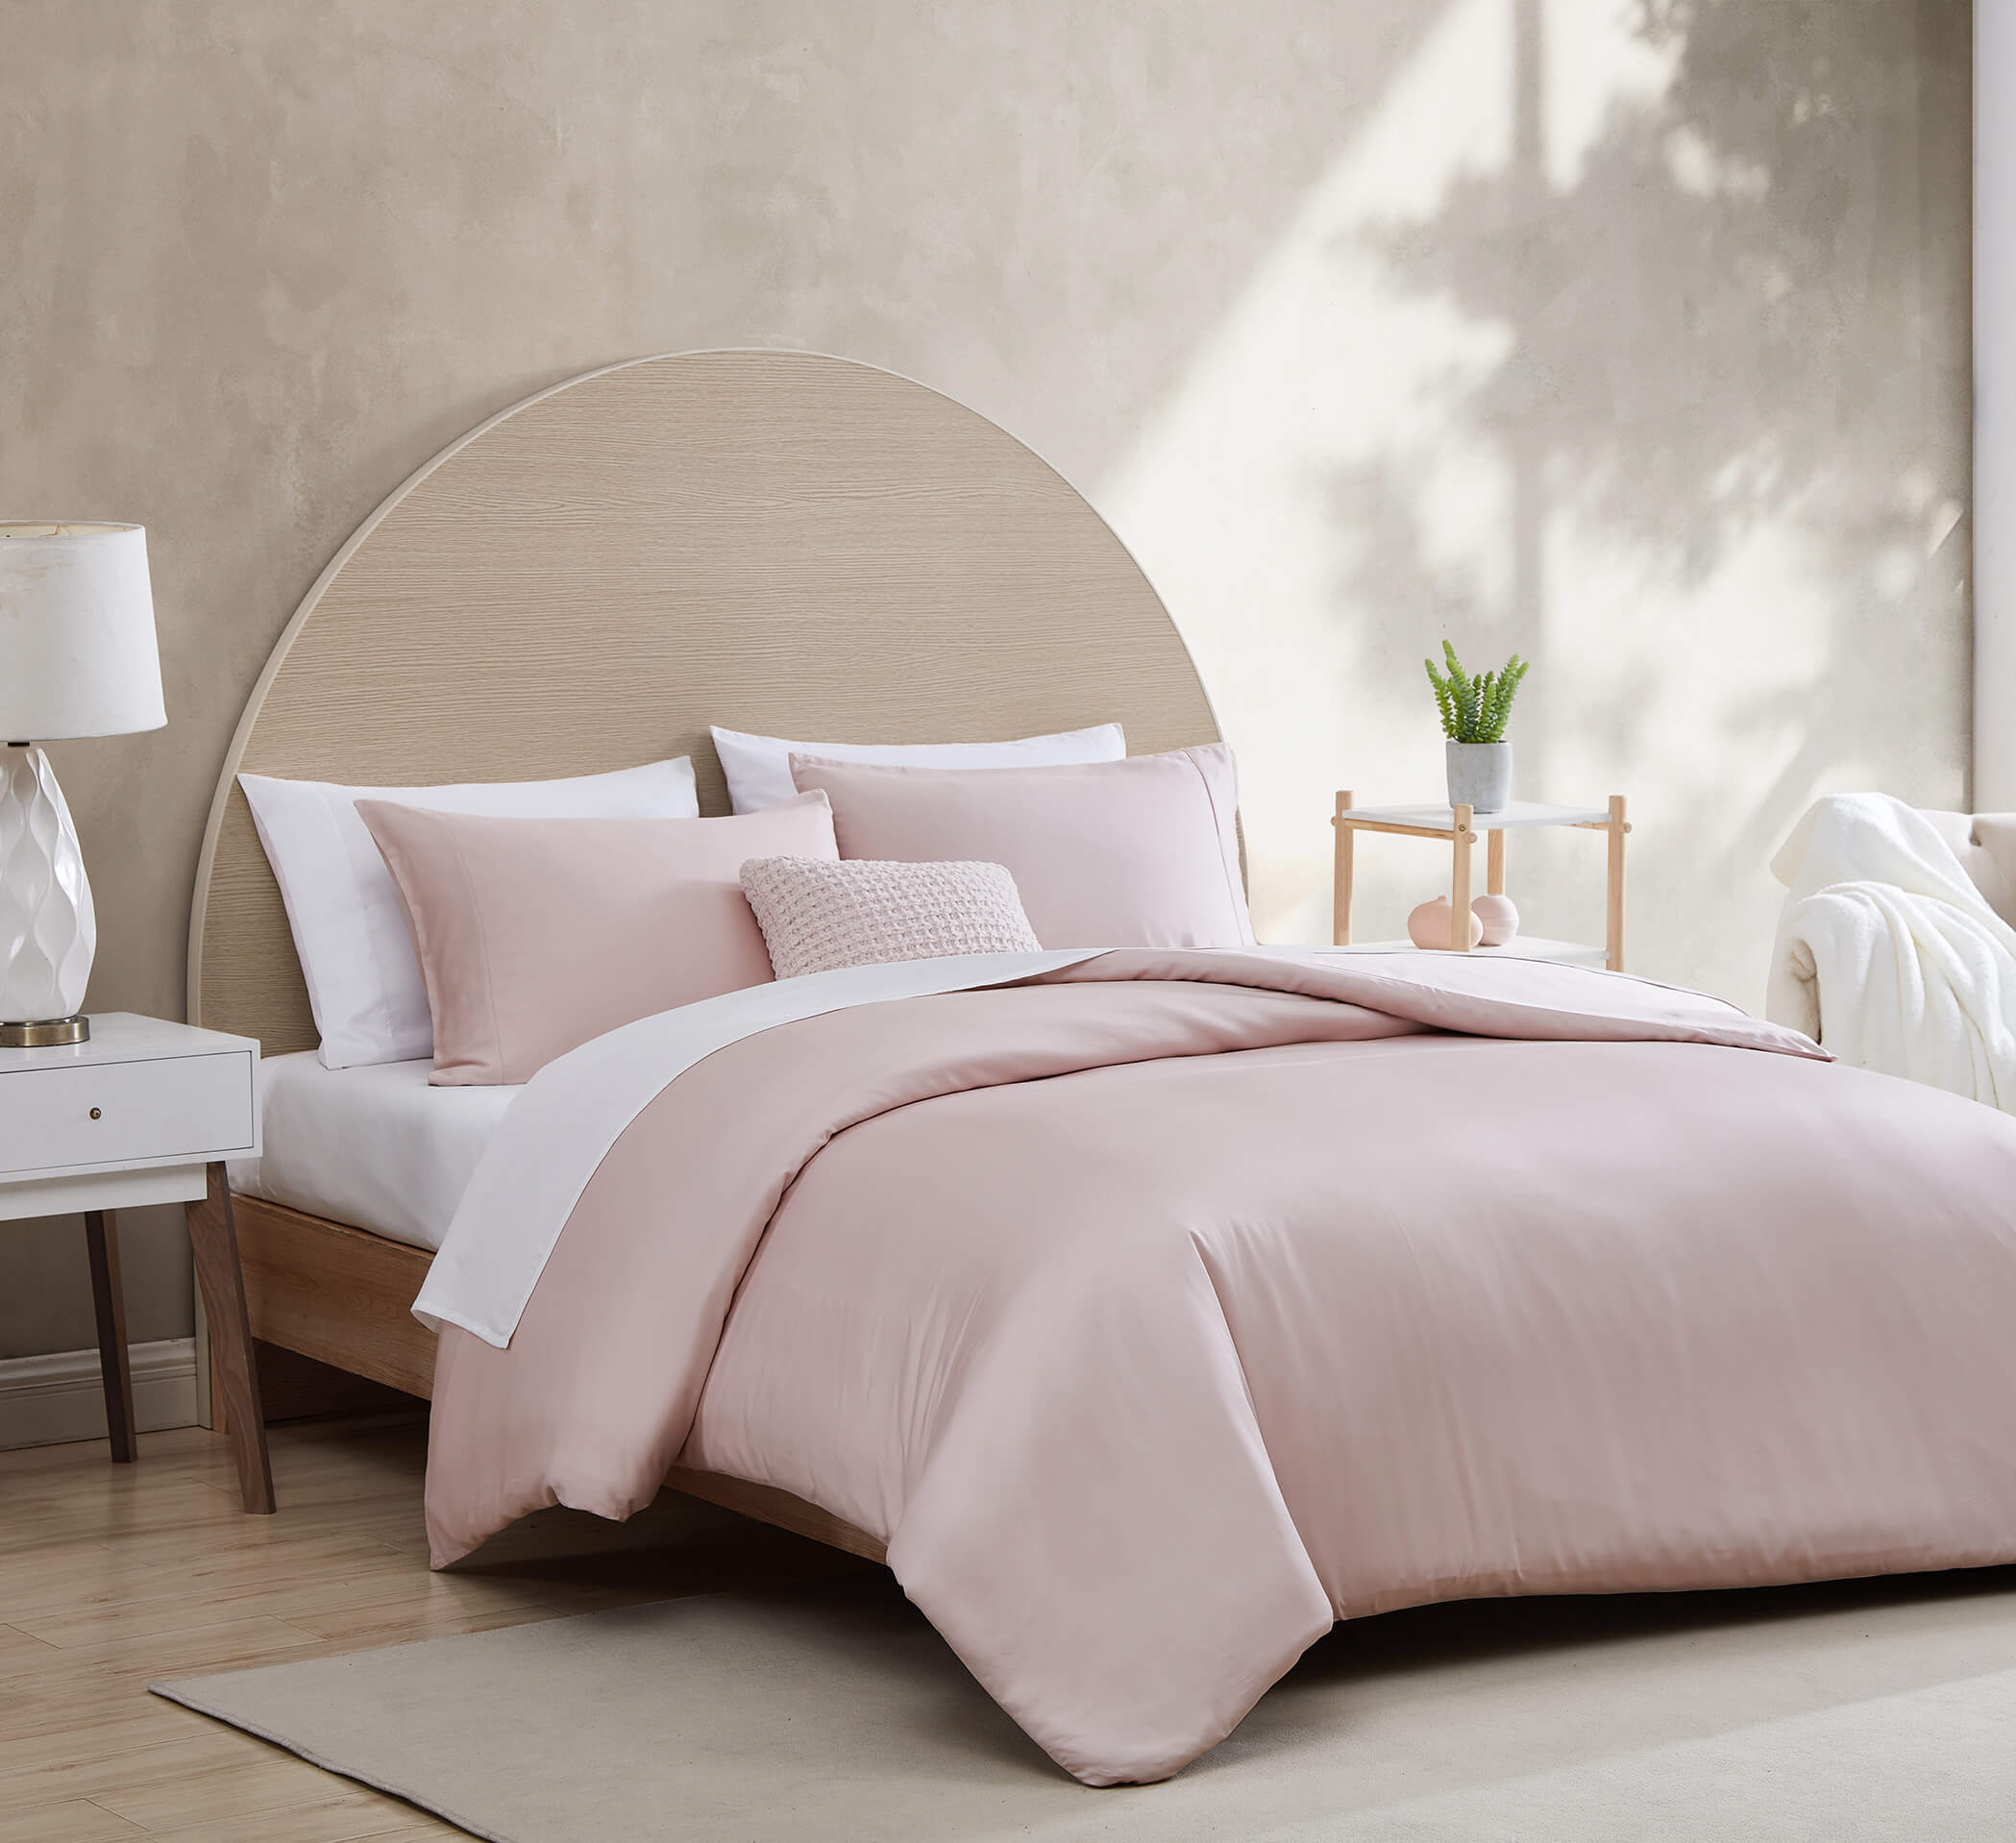 How to Fill a Duvet Cover? Sunday Citizen's Premium Bamboo Duvet Cover in Blush. Pink Duvet Cover with Pink and White matching pillows.